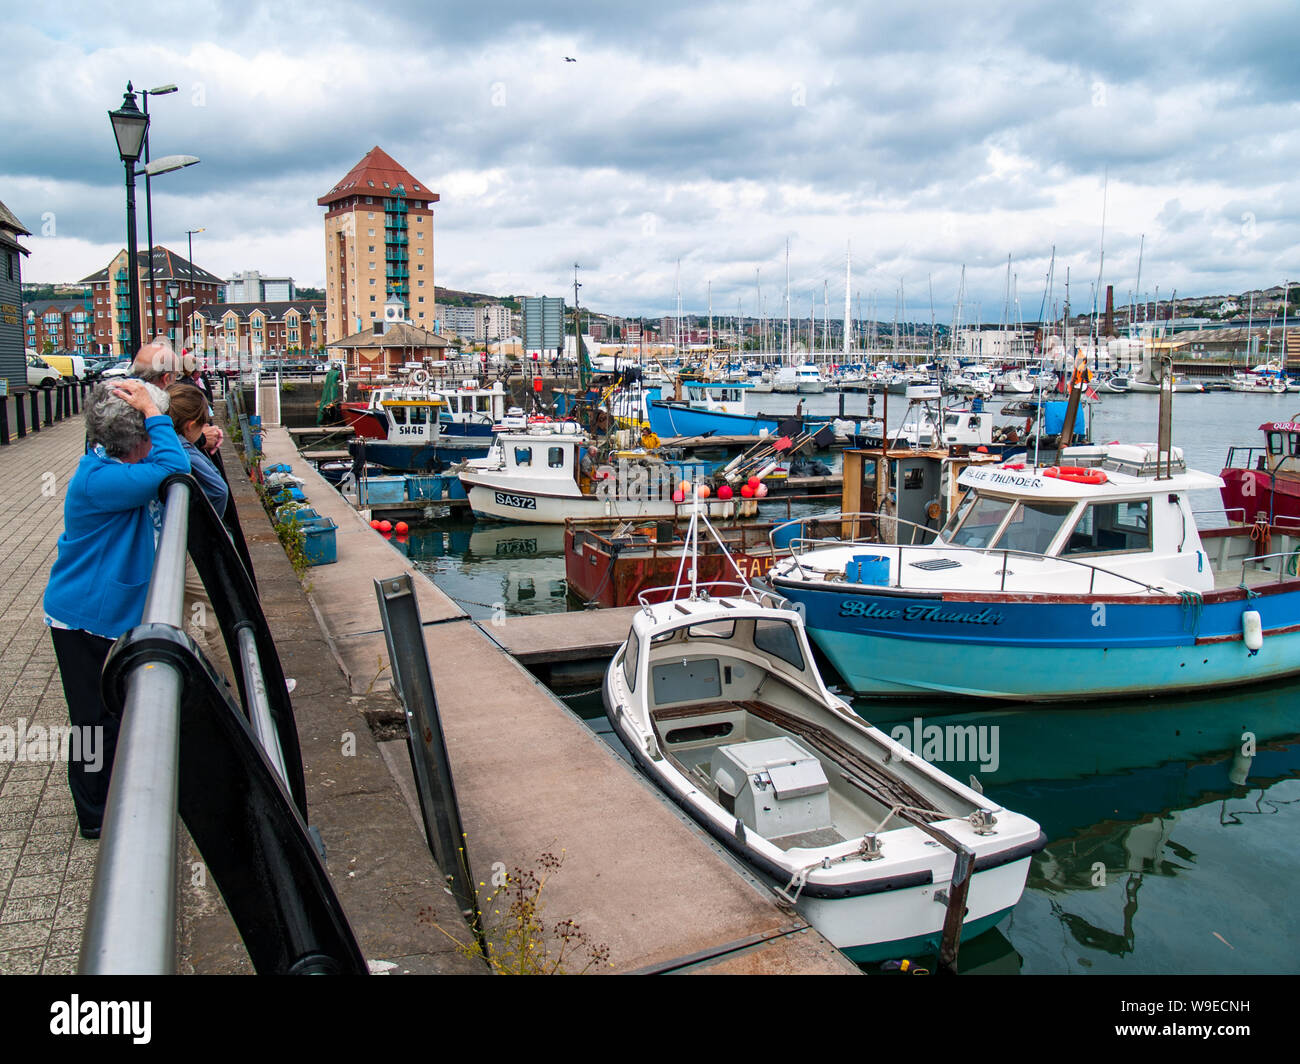 Swansea marina looking towards the Sail Bridge. Fishing boats can be seen in the foreground and private boats and yachts towards the bridge. Wales, UK Stock Photo